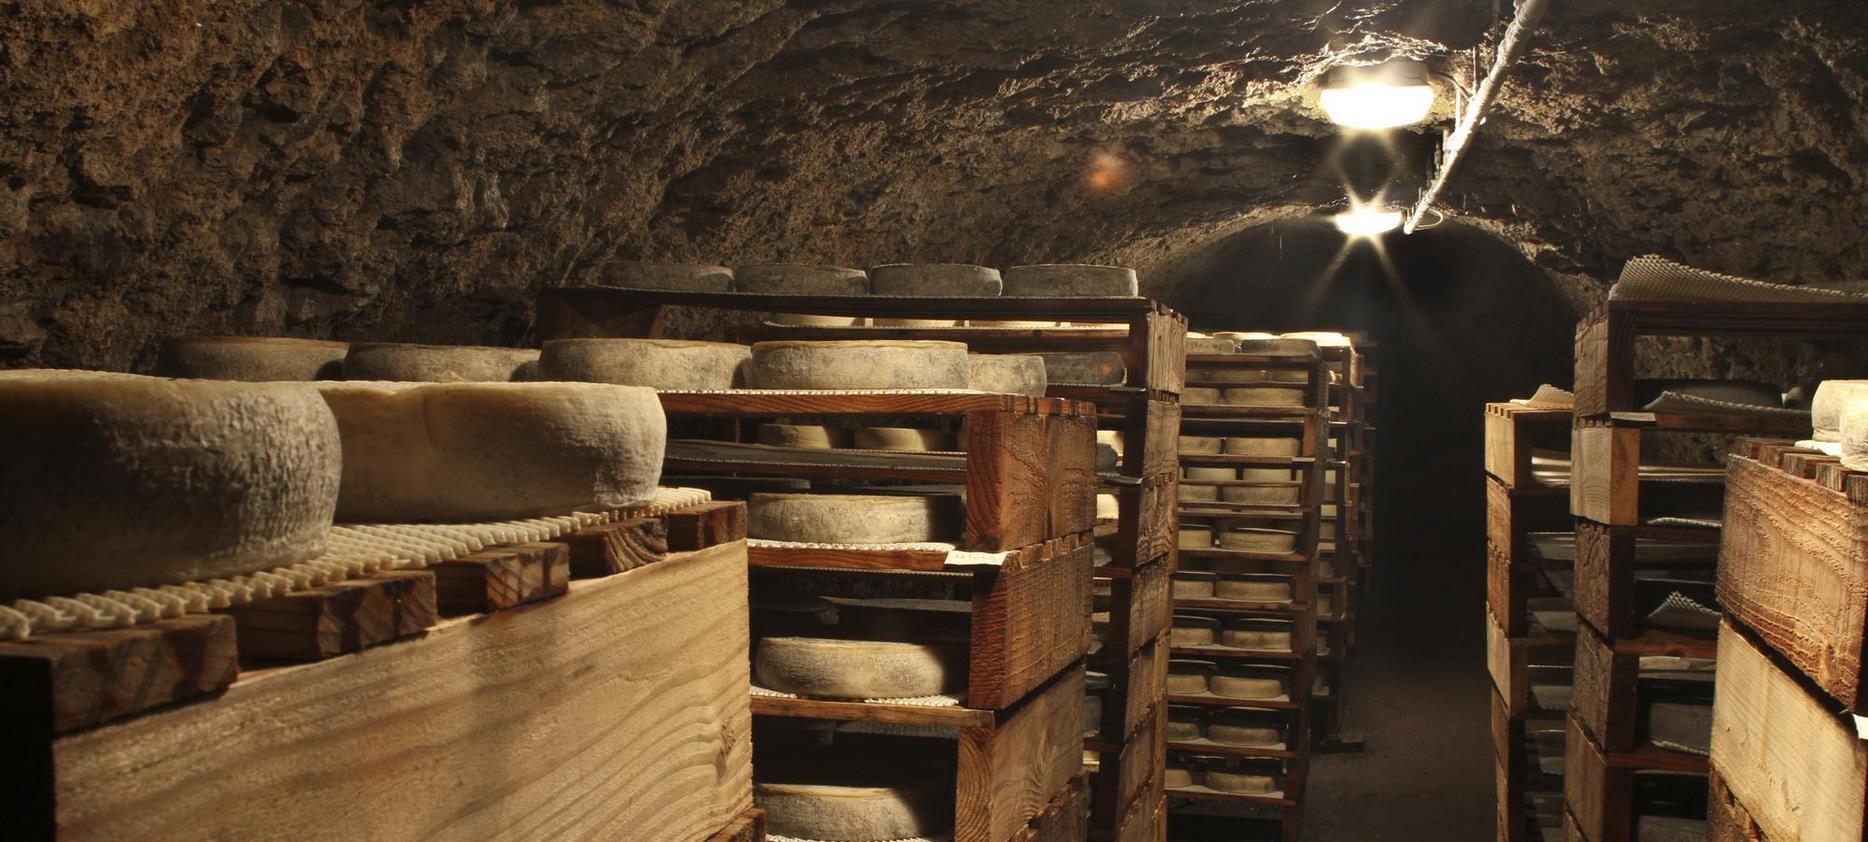 Super Besse - Maturation cellar of Saint Nectaire - Aoc cheese from Auvergne